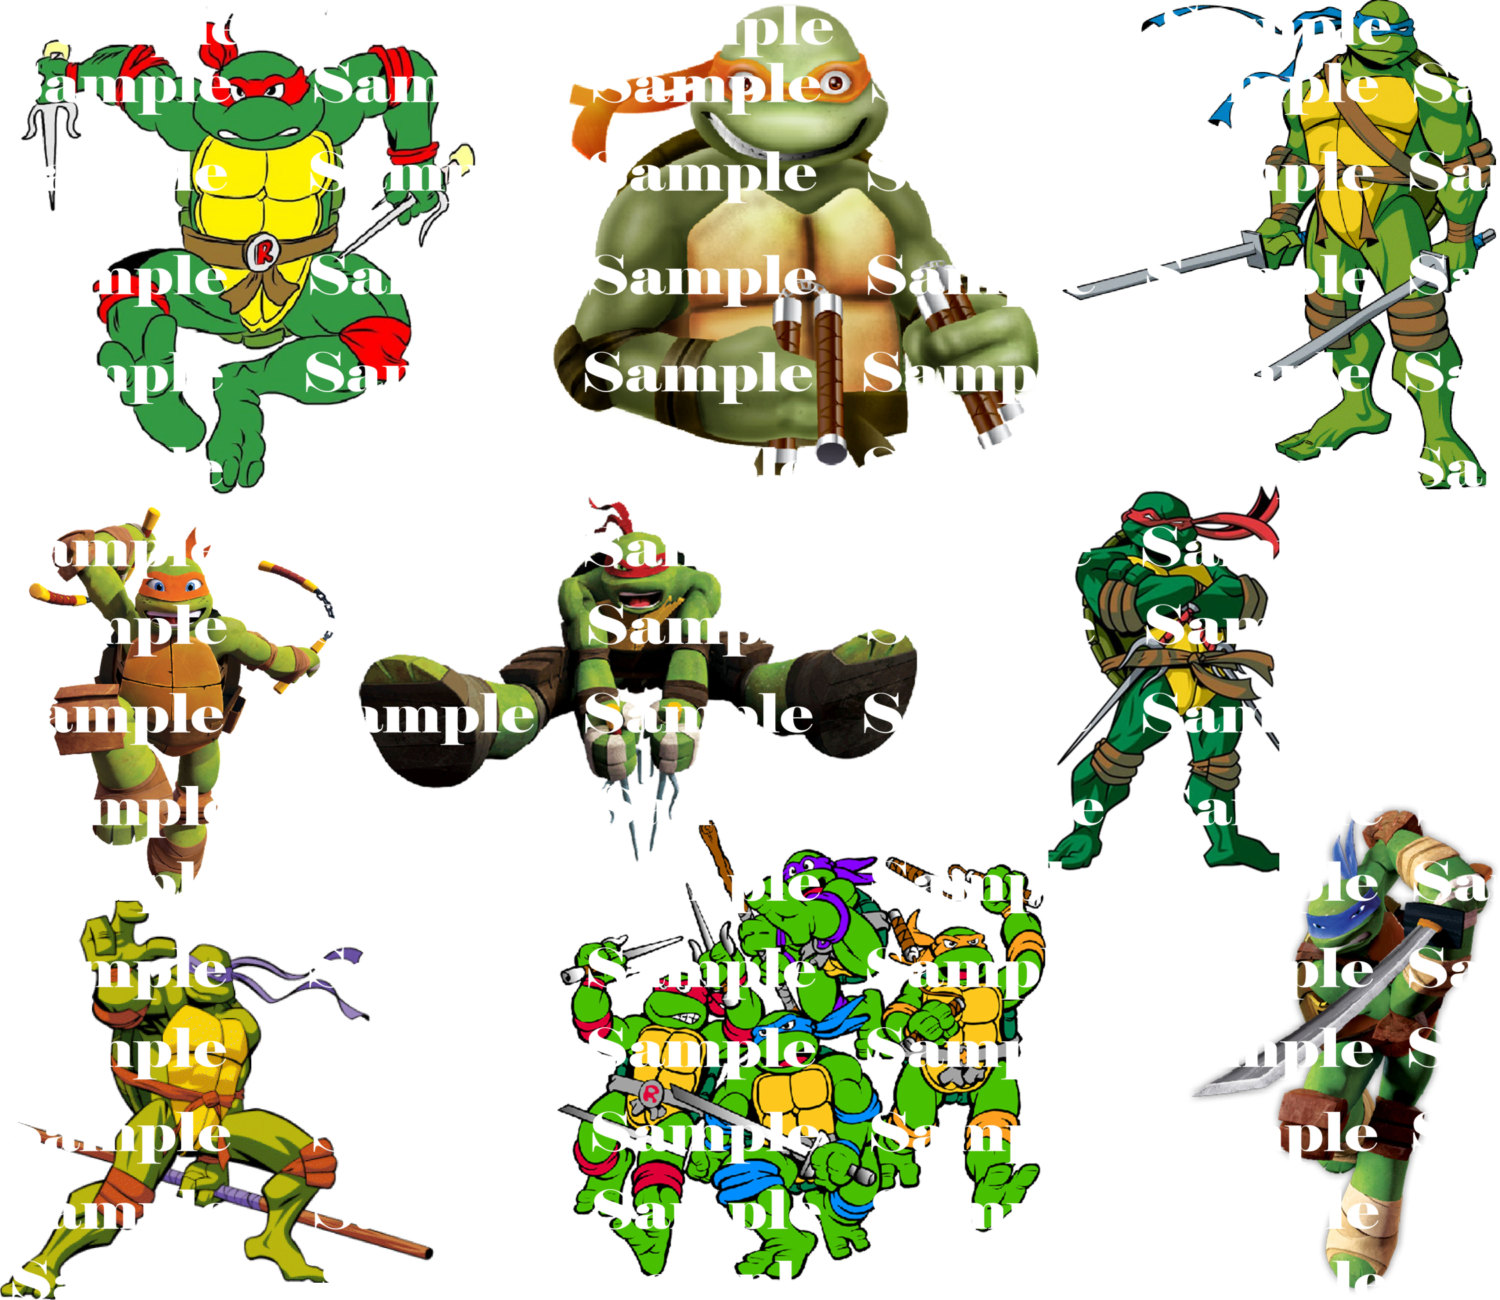 We Discovered 5 Items For Tmnt Clipart